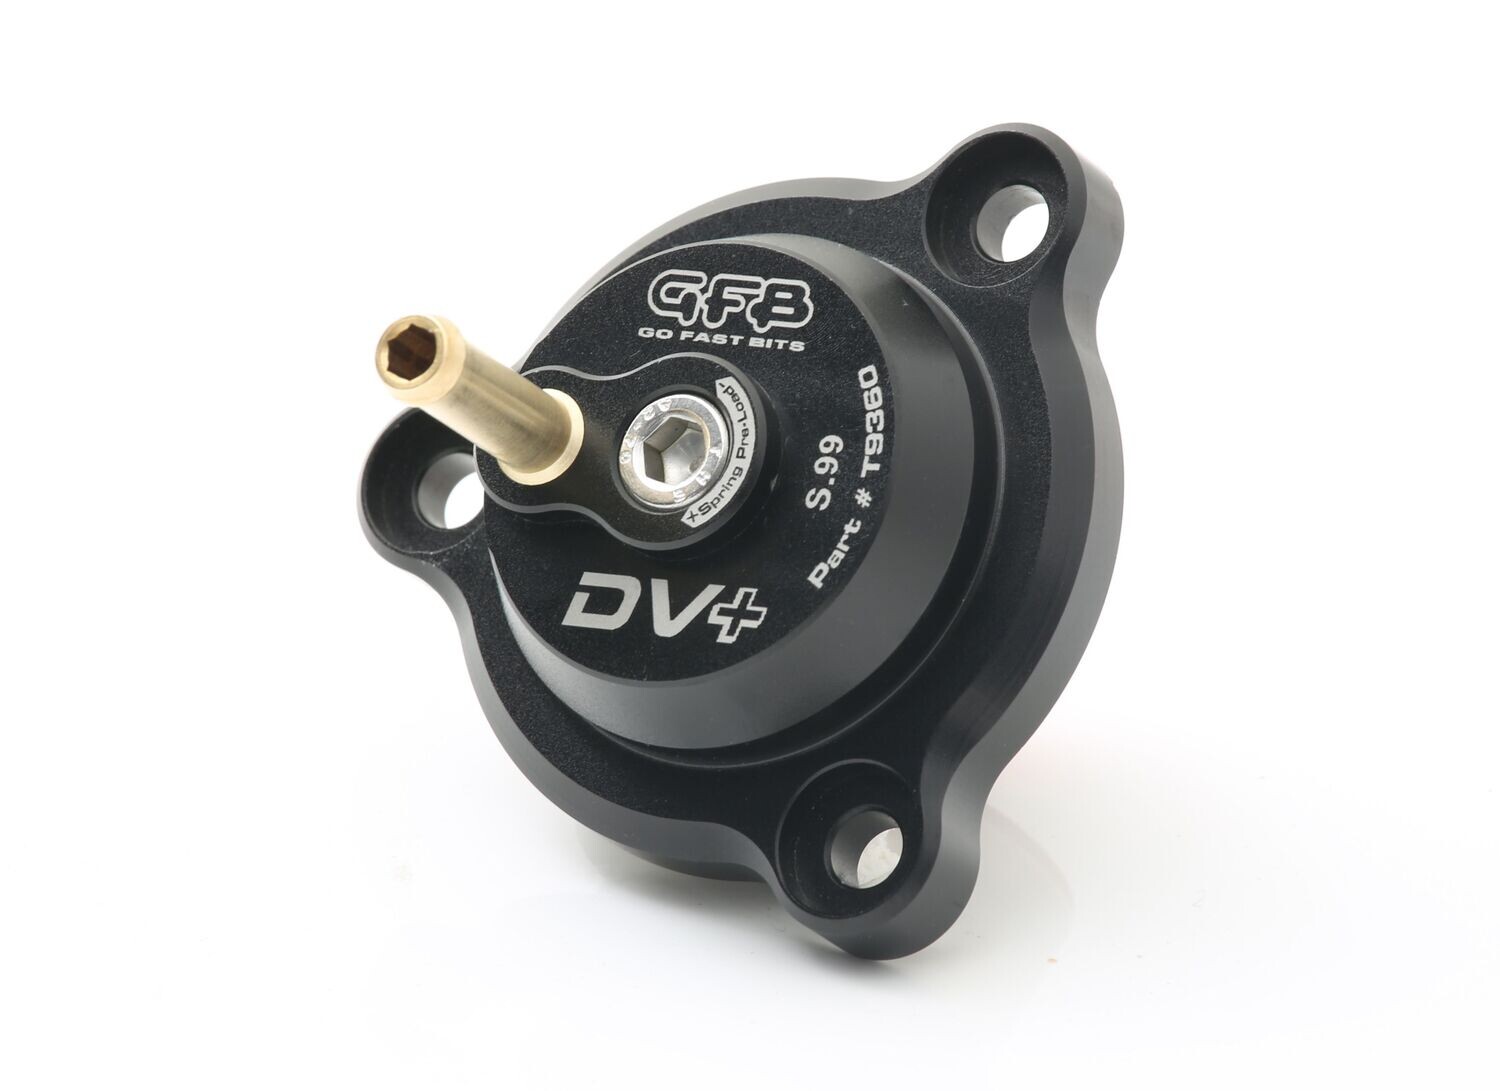 GFB - DV+ T9360 Diverter Valve for Ford, Opel and Holden applications